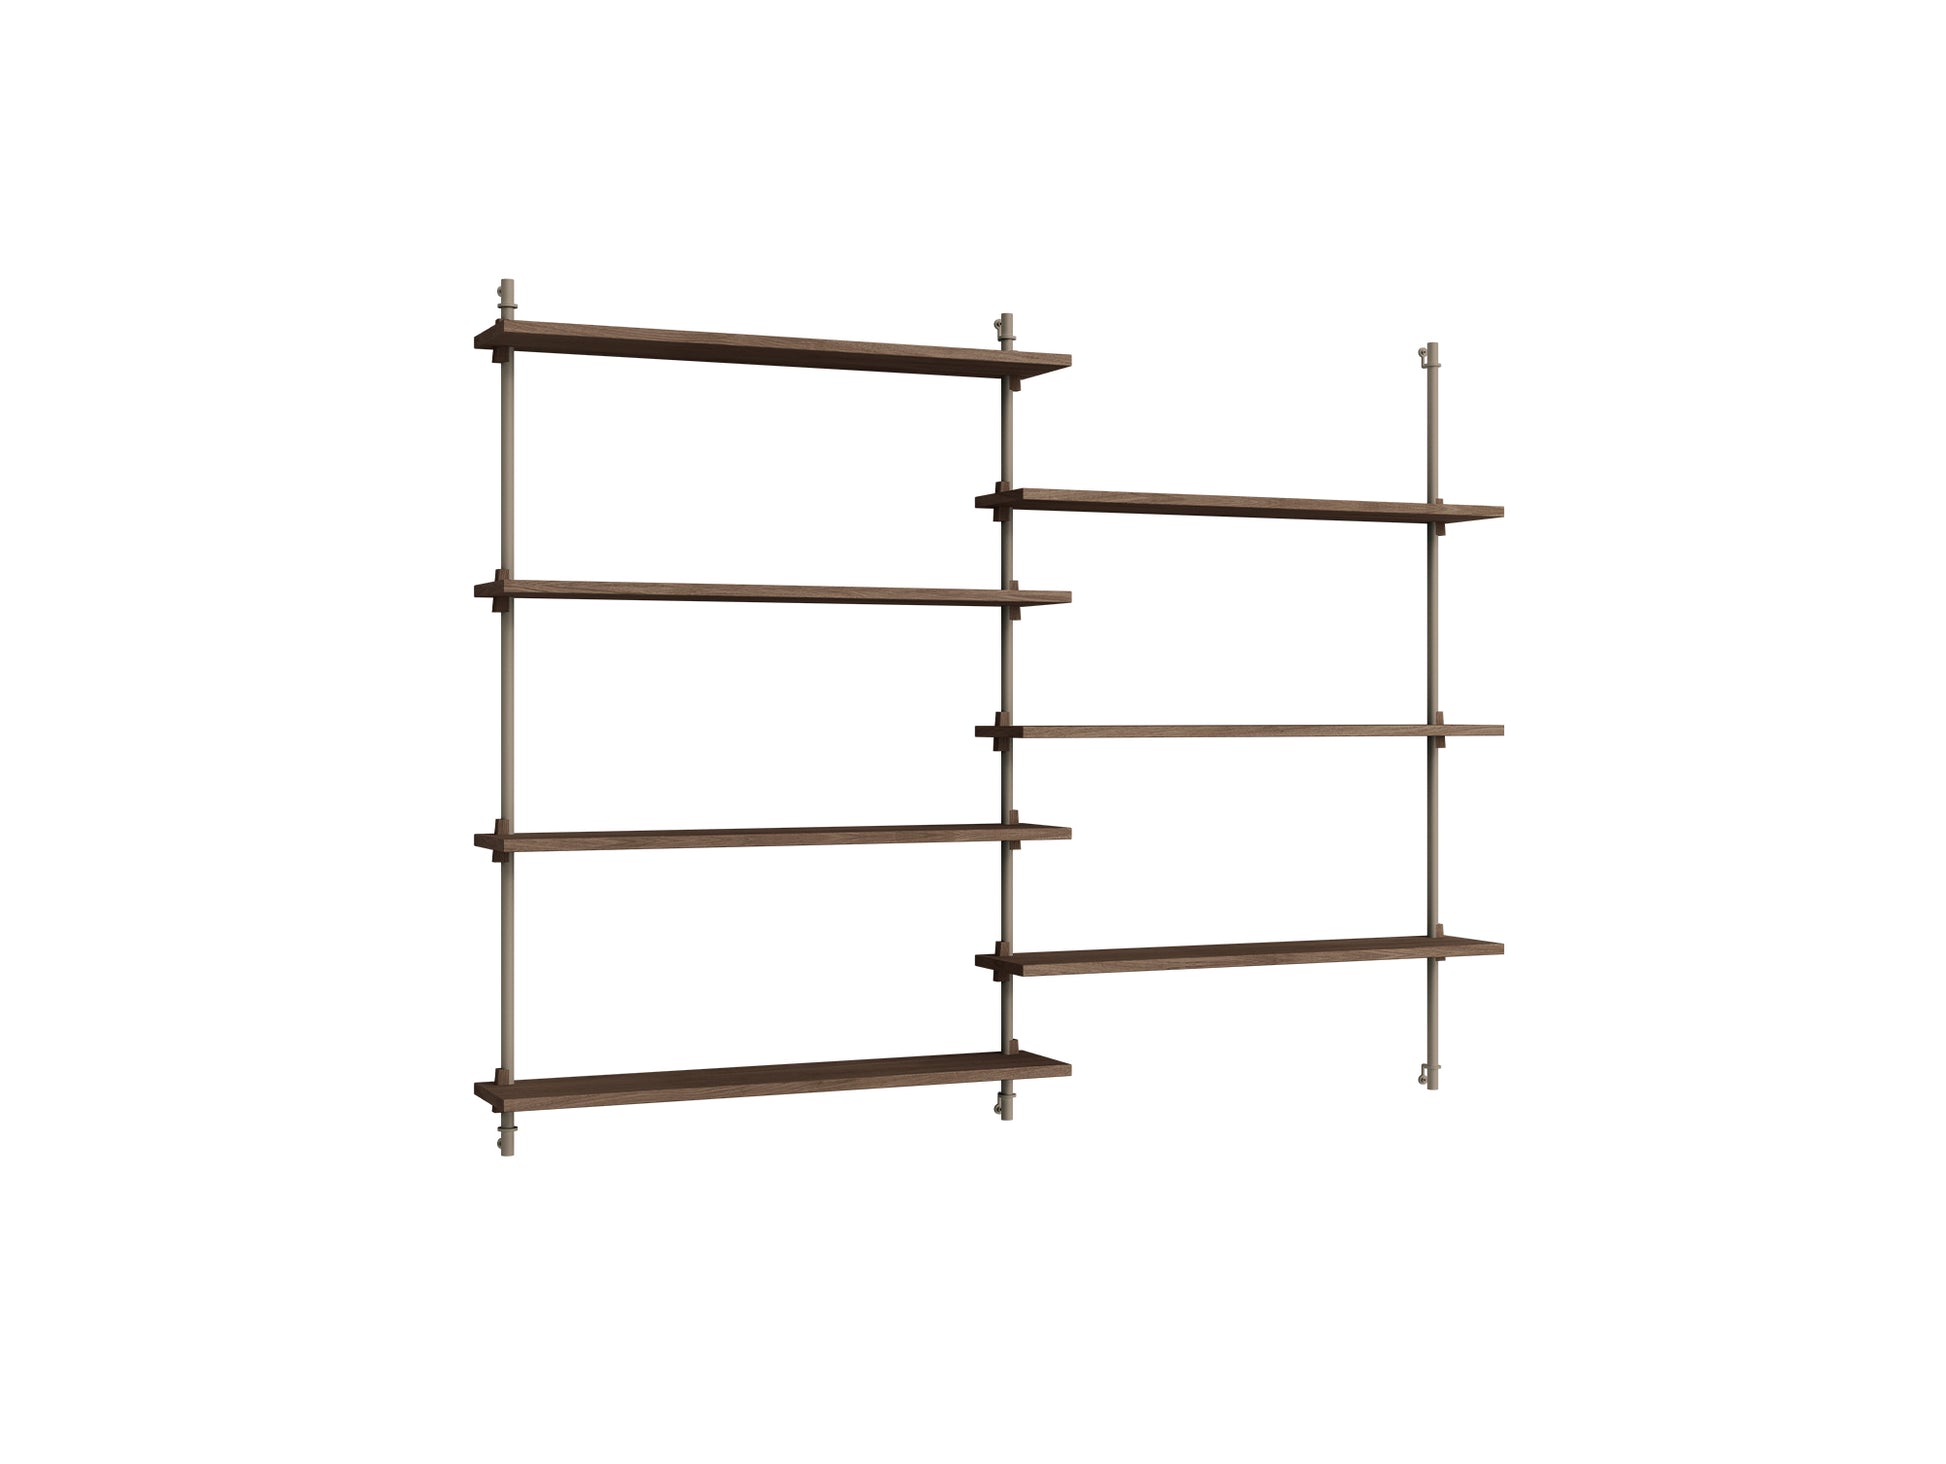 Wall Shelving System Sets (115 cm) by Moebe - WS.115.2 / Warm Grey Uprights / Smoked Oak